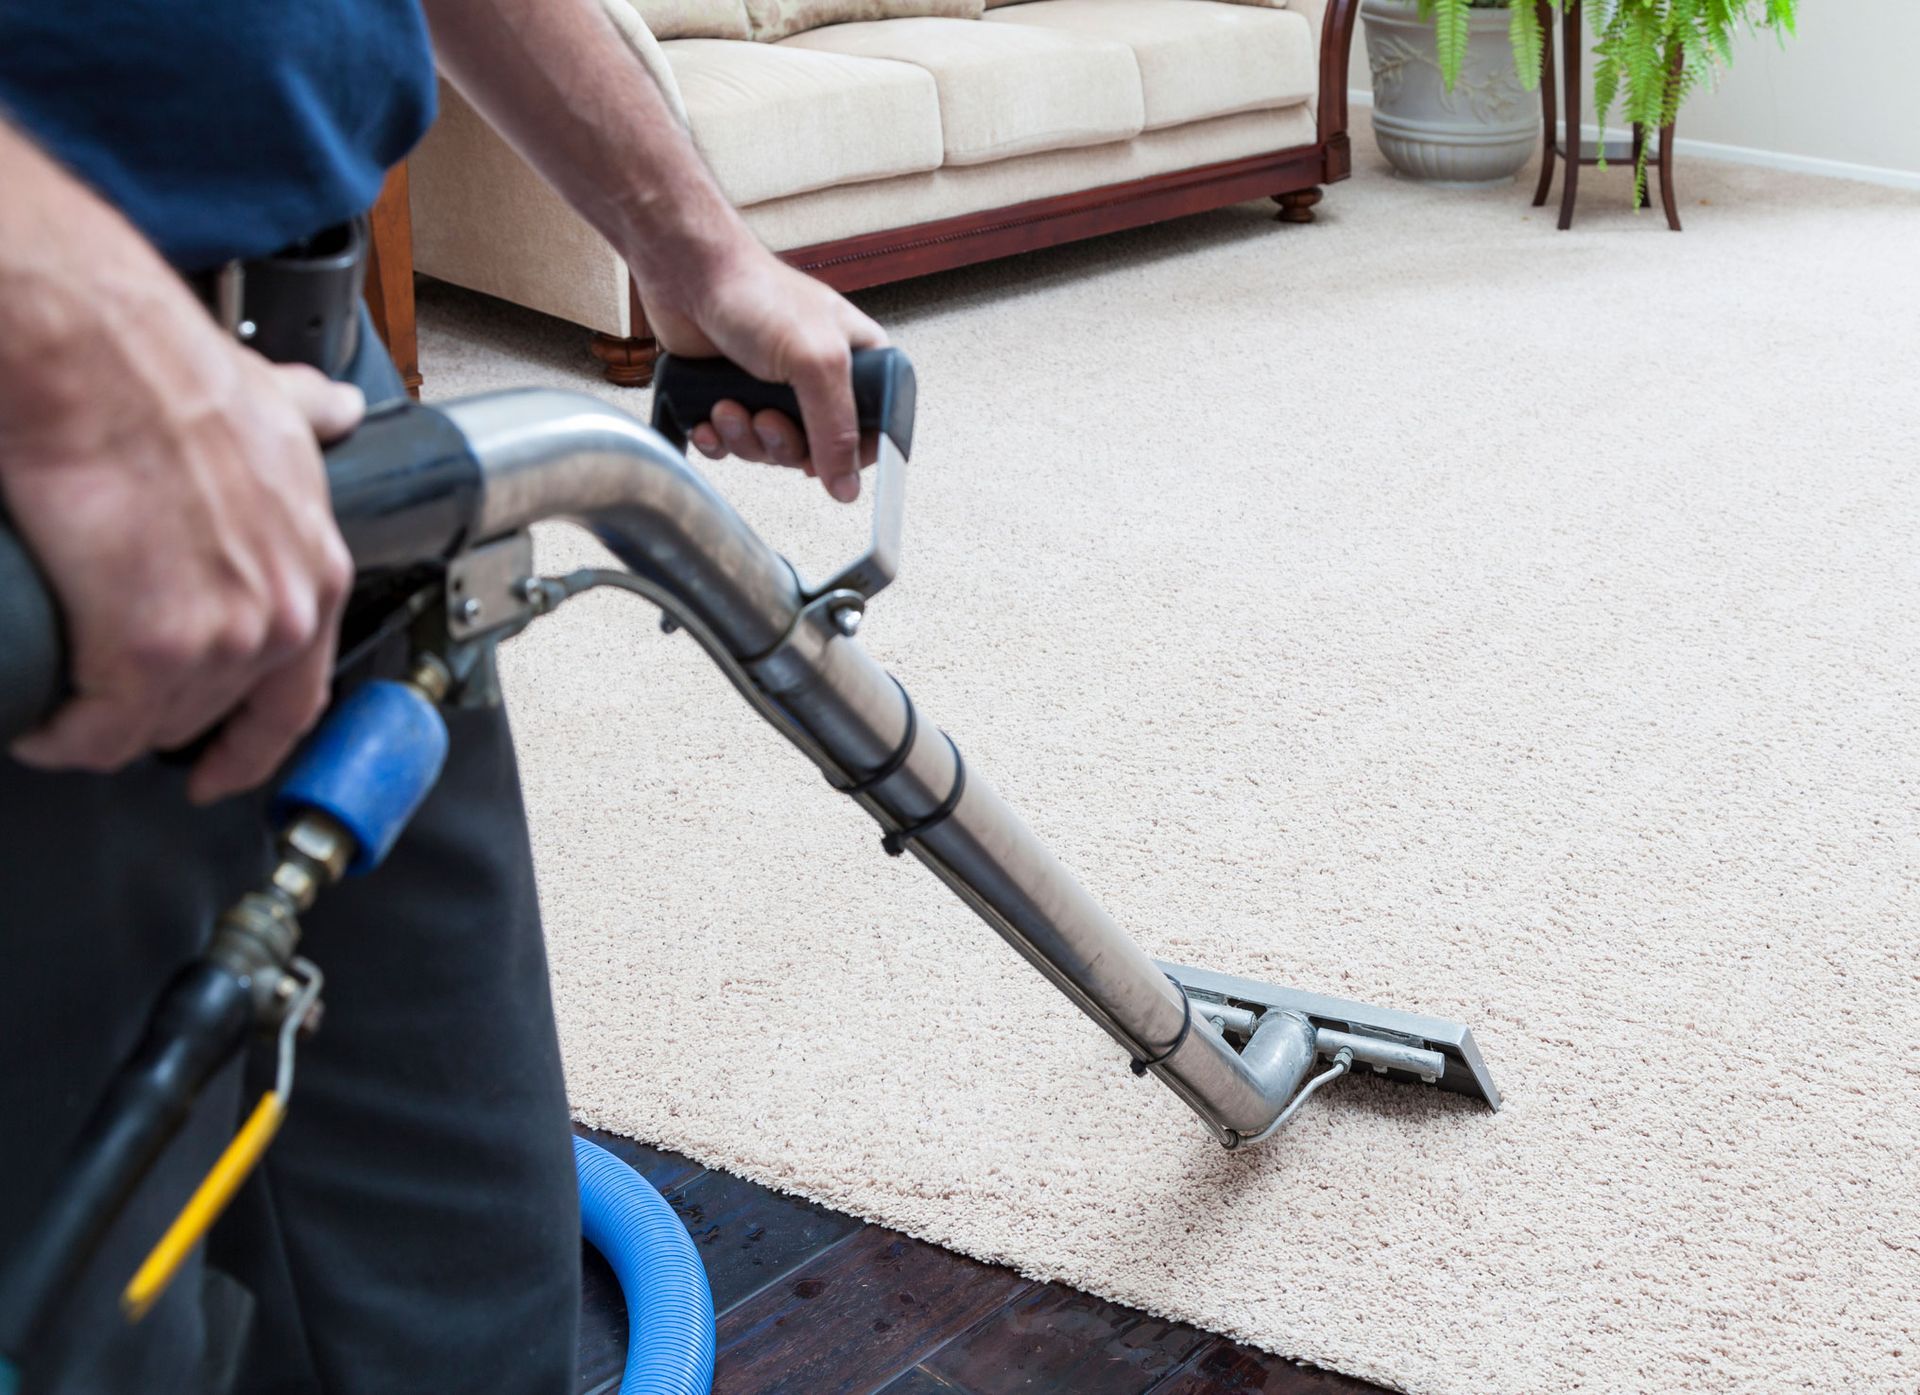 Cleaning The Carpet | Billings, MT | CBM Carpet Cleaning